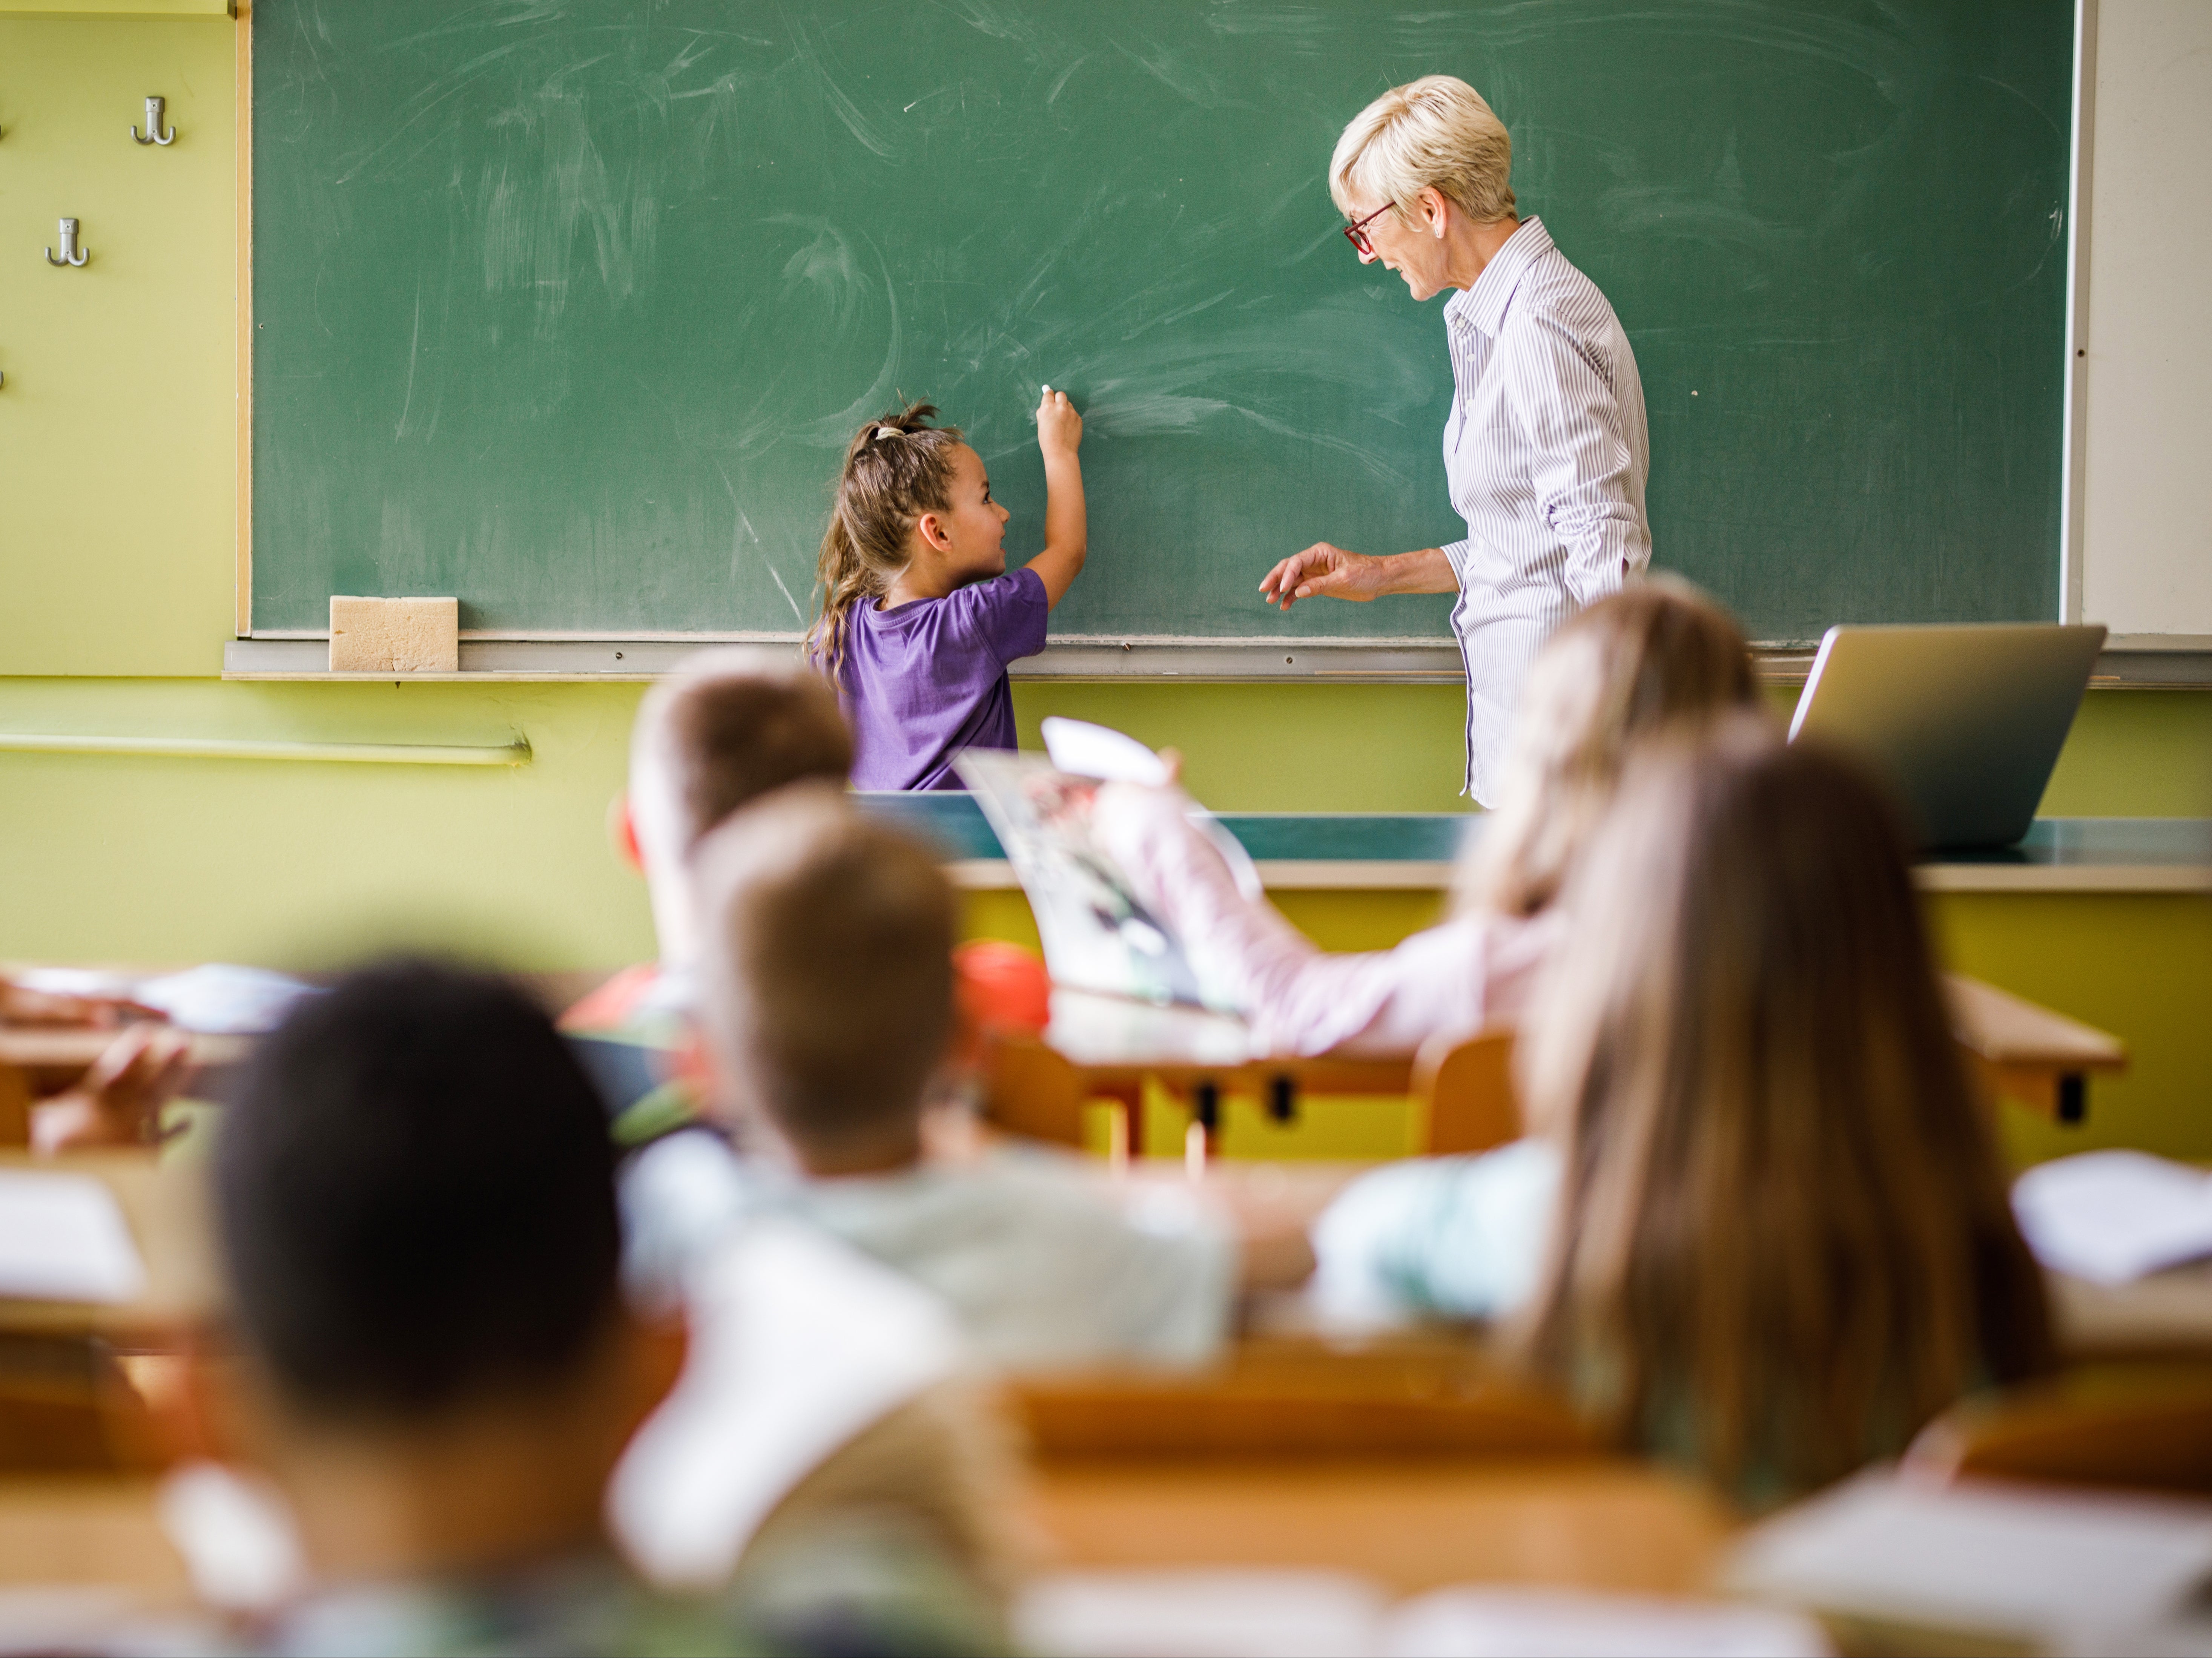 Scientists have said guidelines over how to improve ventilation in classrooms are needed